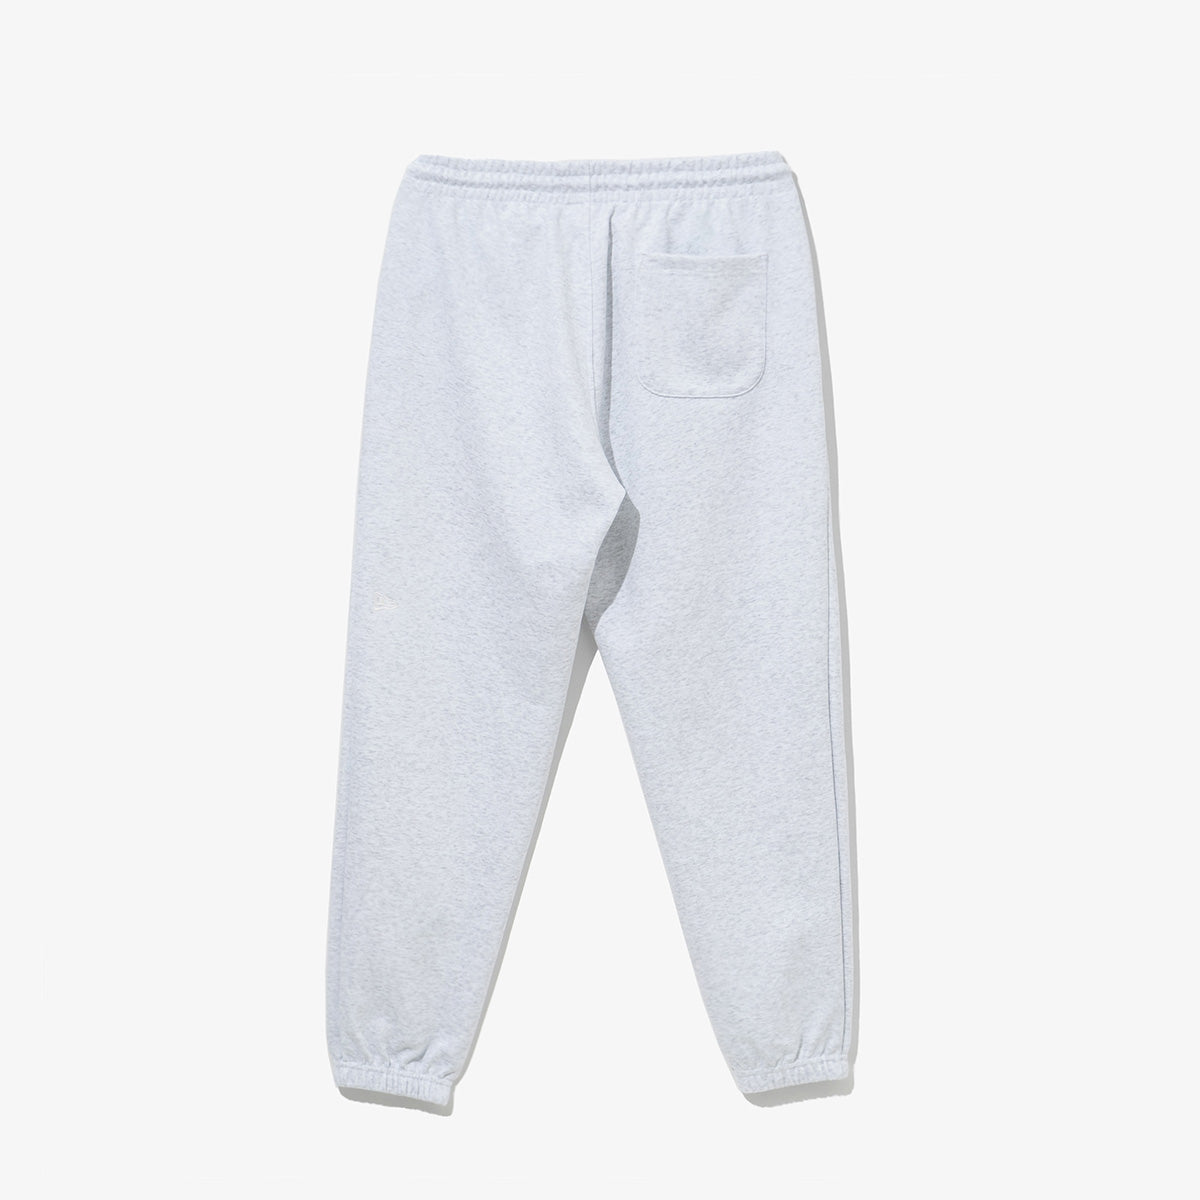 NEW ERA BASIC ESSENTIAL LOOSE FIT GRAY KNIT PANTS